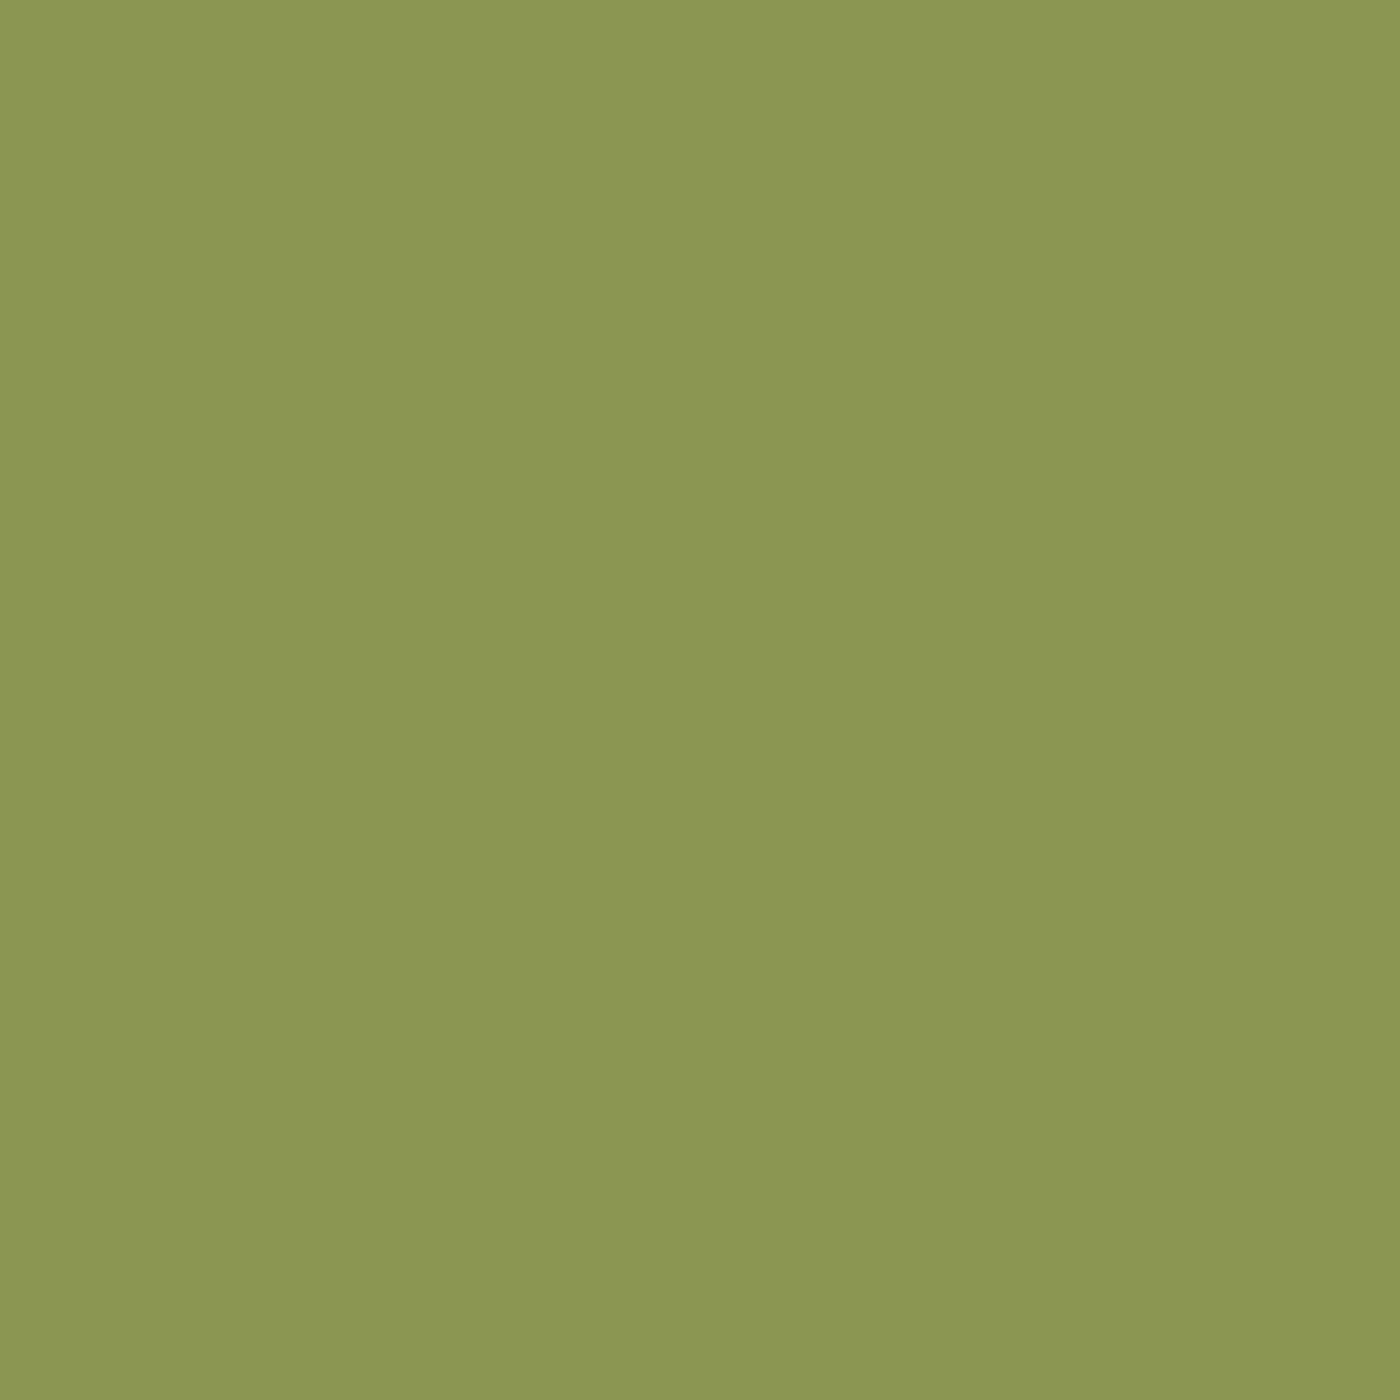 JELLYBEAN GREEN - Smooth 12x12 Cardstock - Pop-Tone Collection